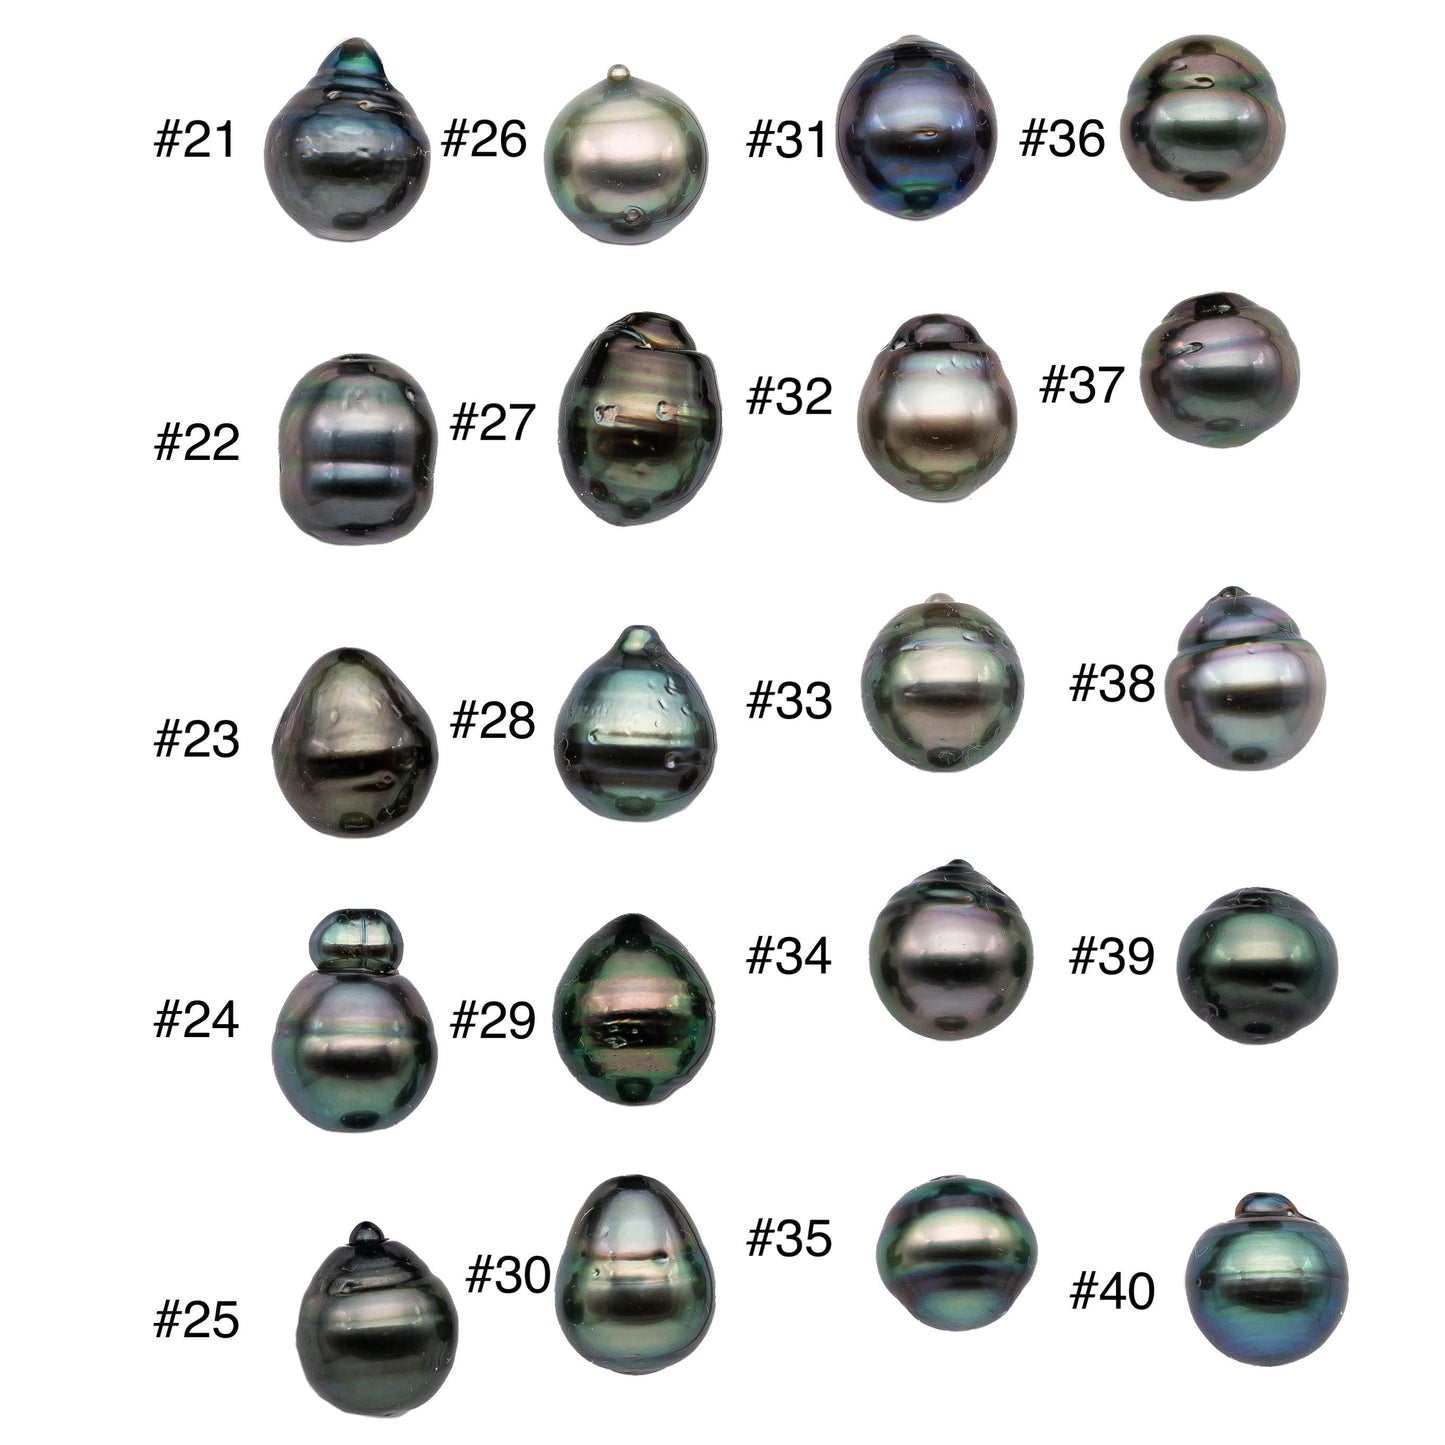 One Piece Tahitian Pearl Drops with Natural Color in Single Loose Undrilled Black Pearl with High Luster and No Hole 11-11.5mm, SKU # 1127TH